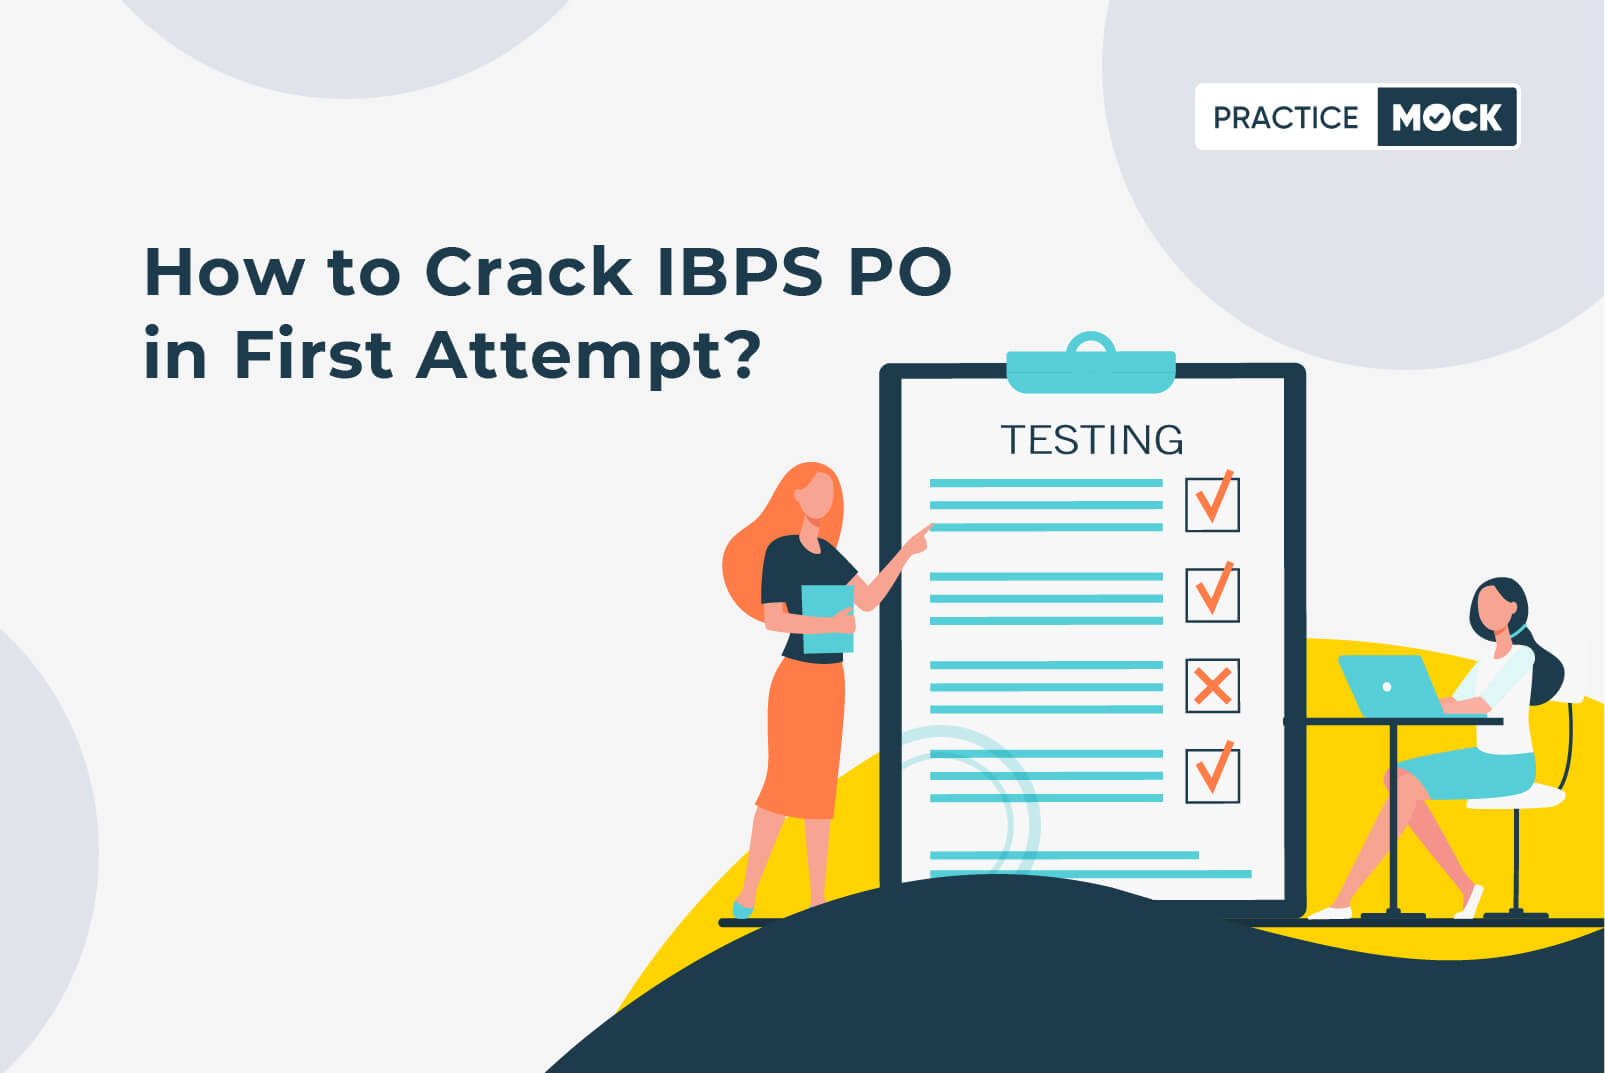 How to Crack IBPS PO in First Attempt?